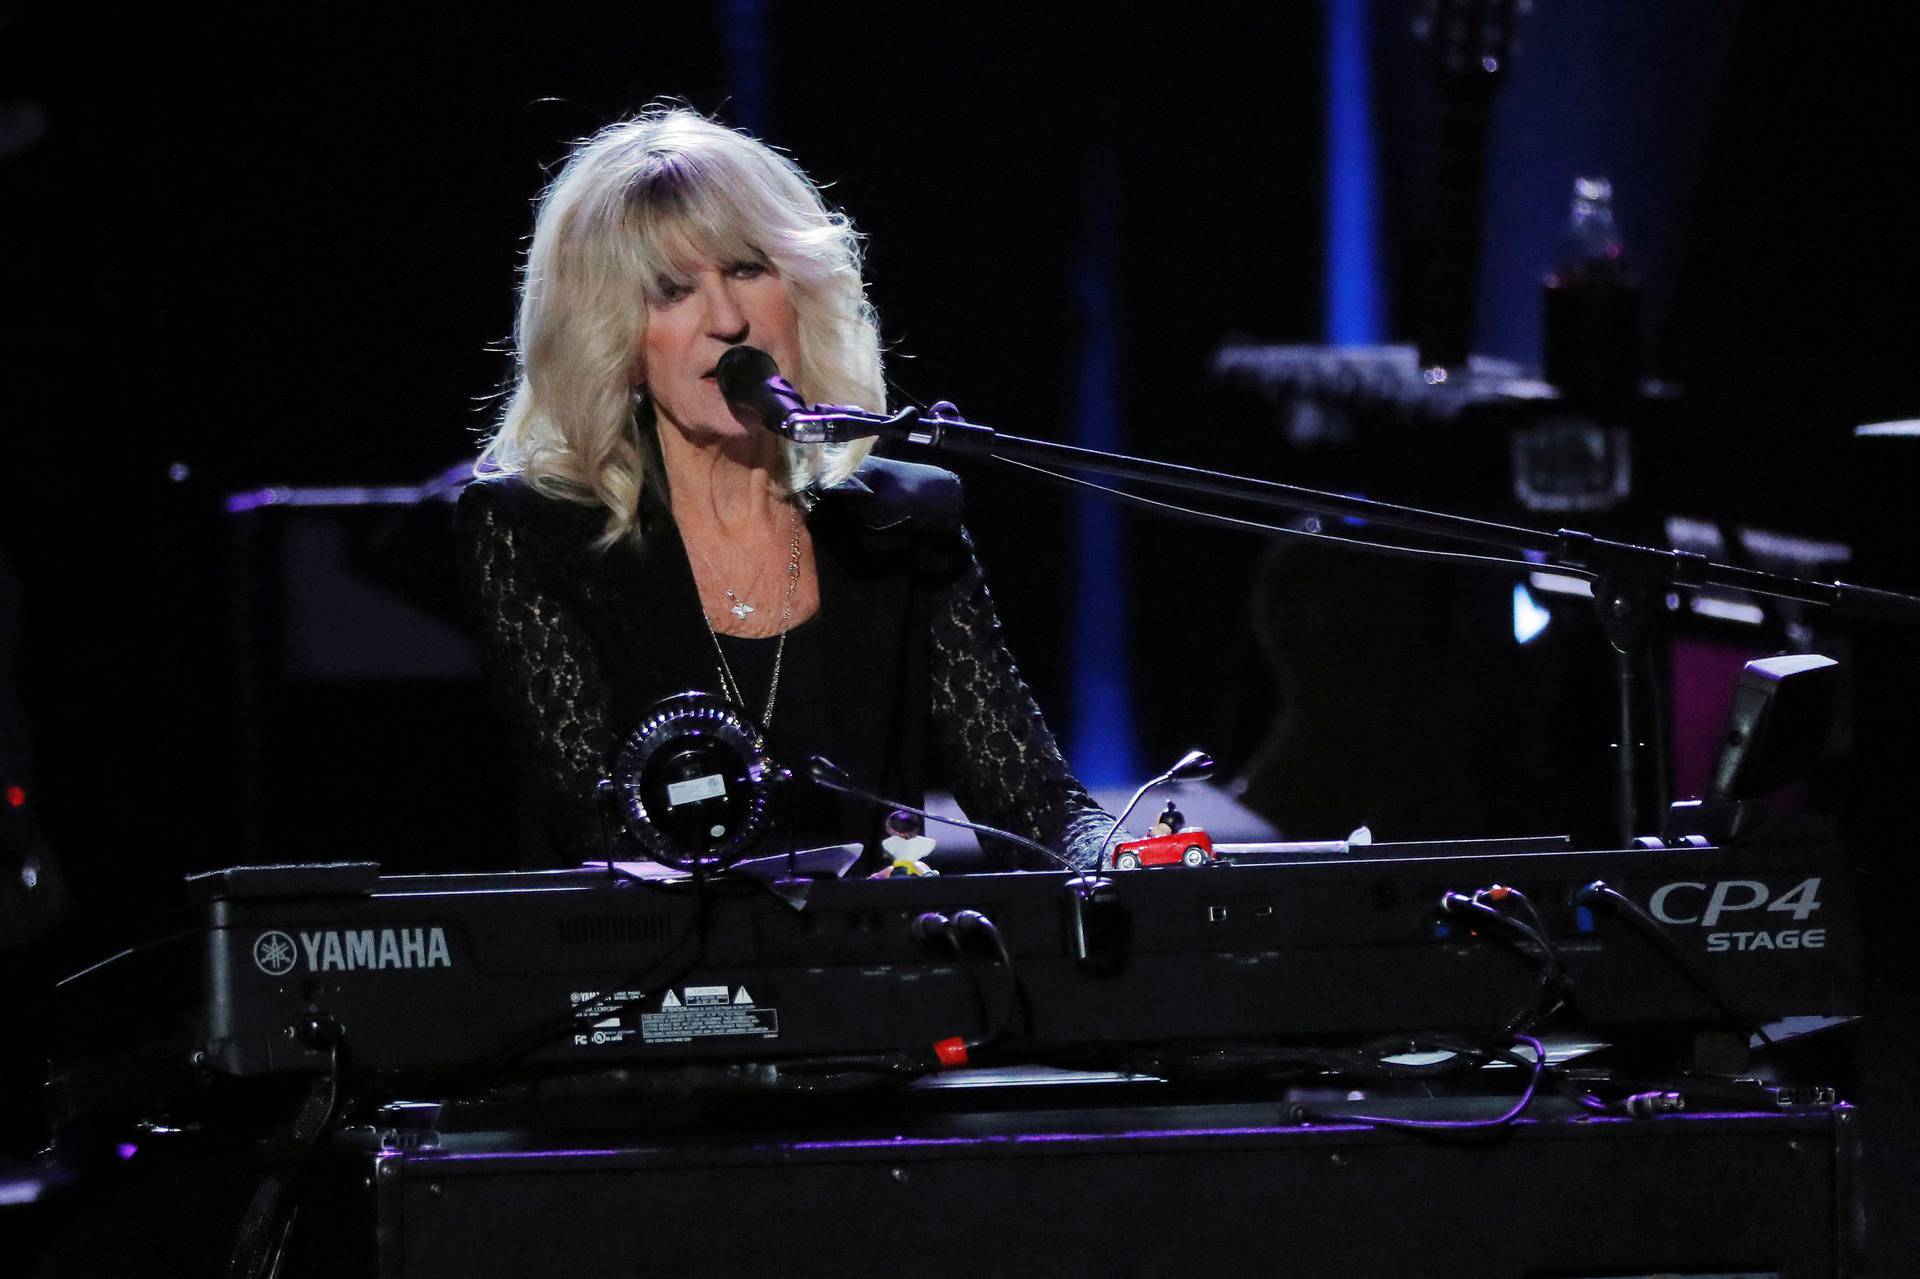 FILE PHOTO: Honoree Christine McVie of the group Fleetwood Mac performs during the 2018 MusiCares Person of the Year show honoring Fleetwood Mac at Radio City Music Hall in Manhattan, New York